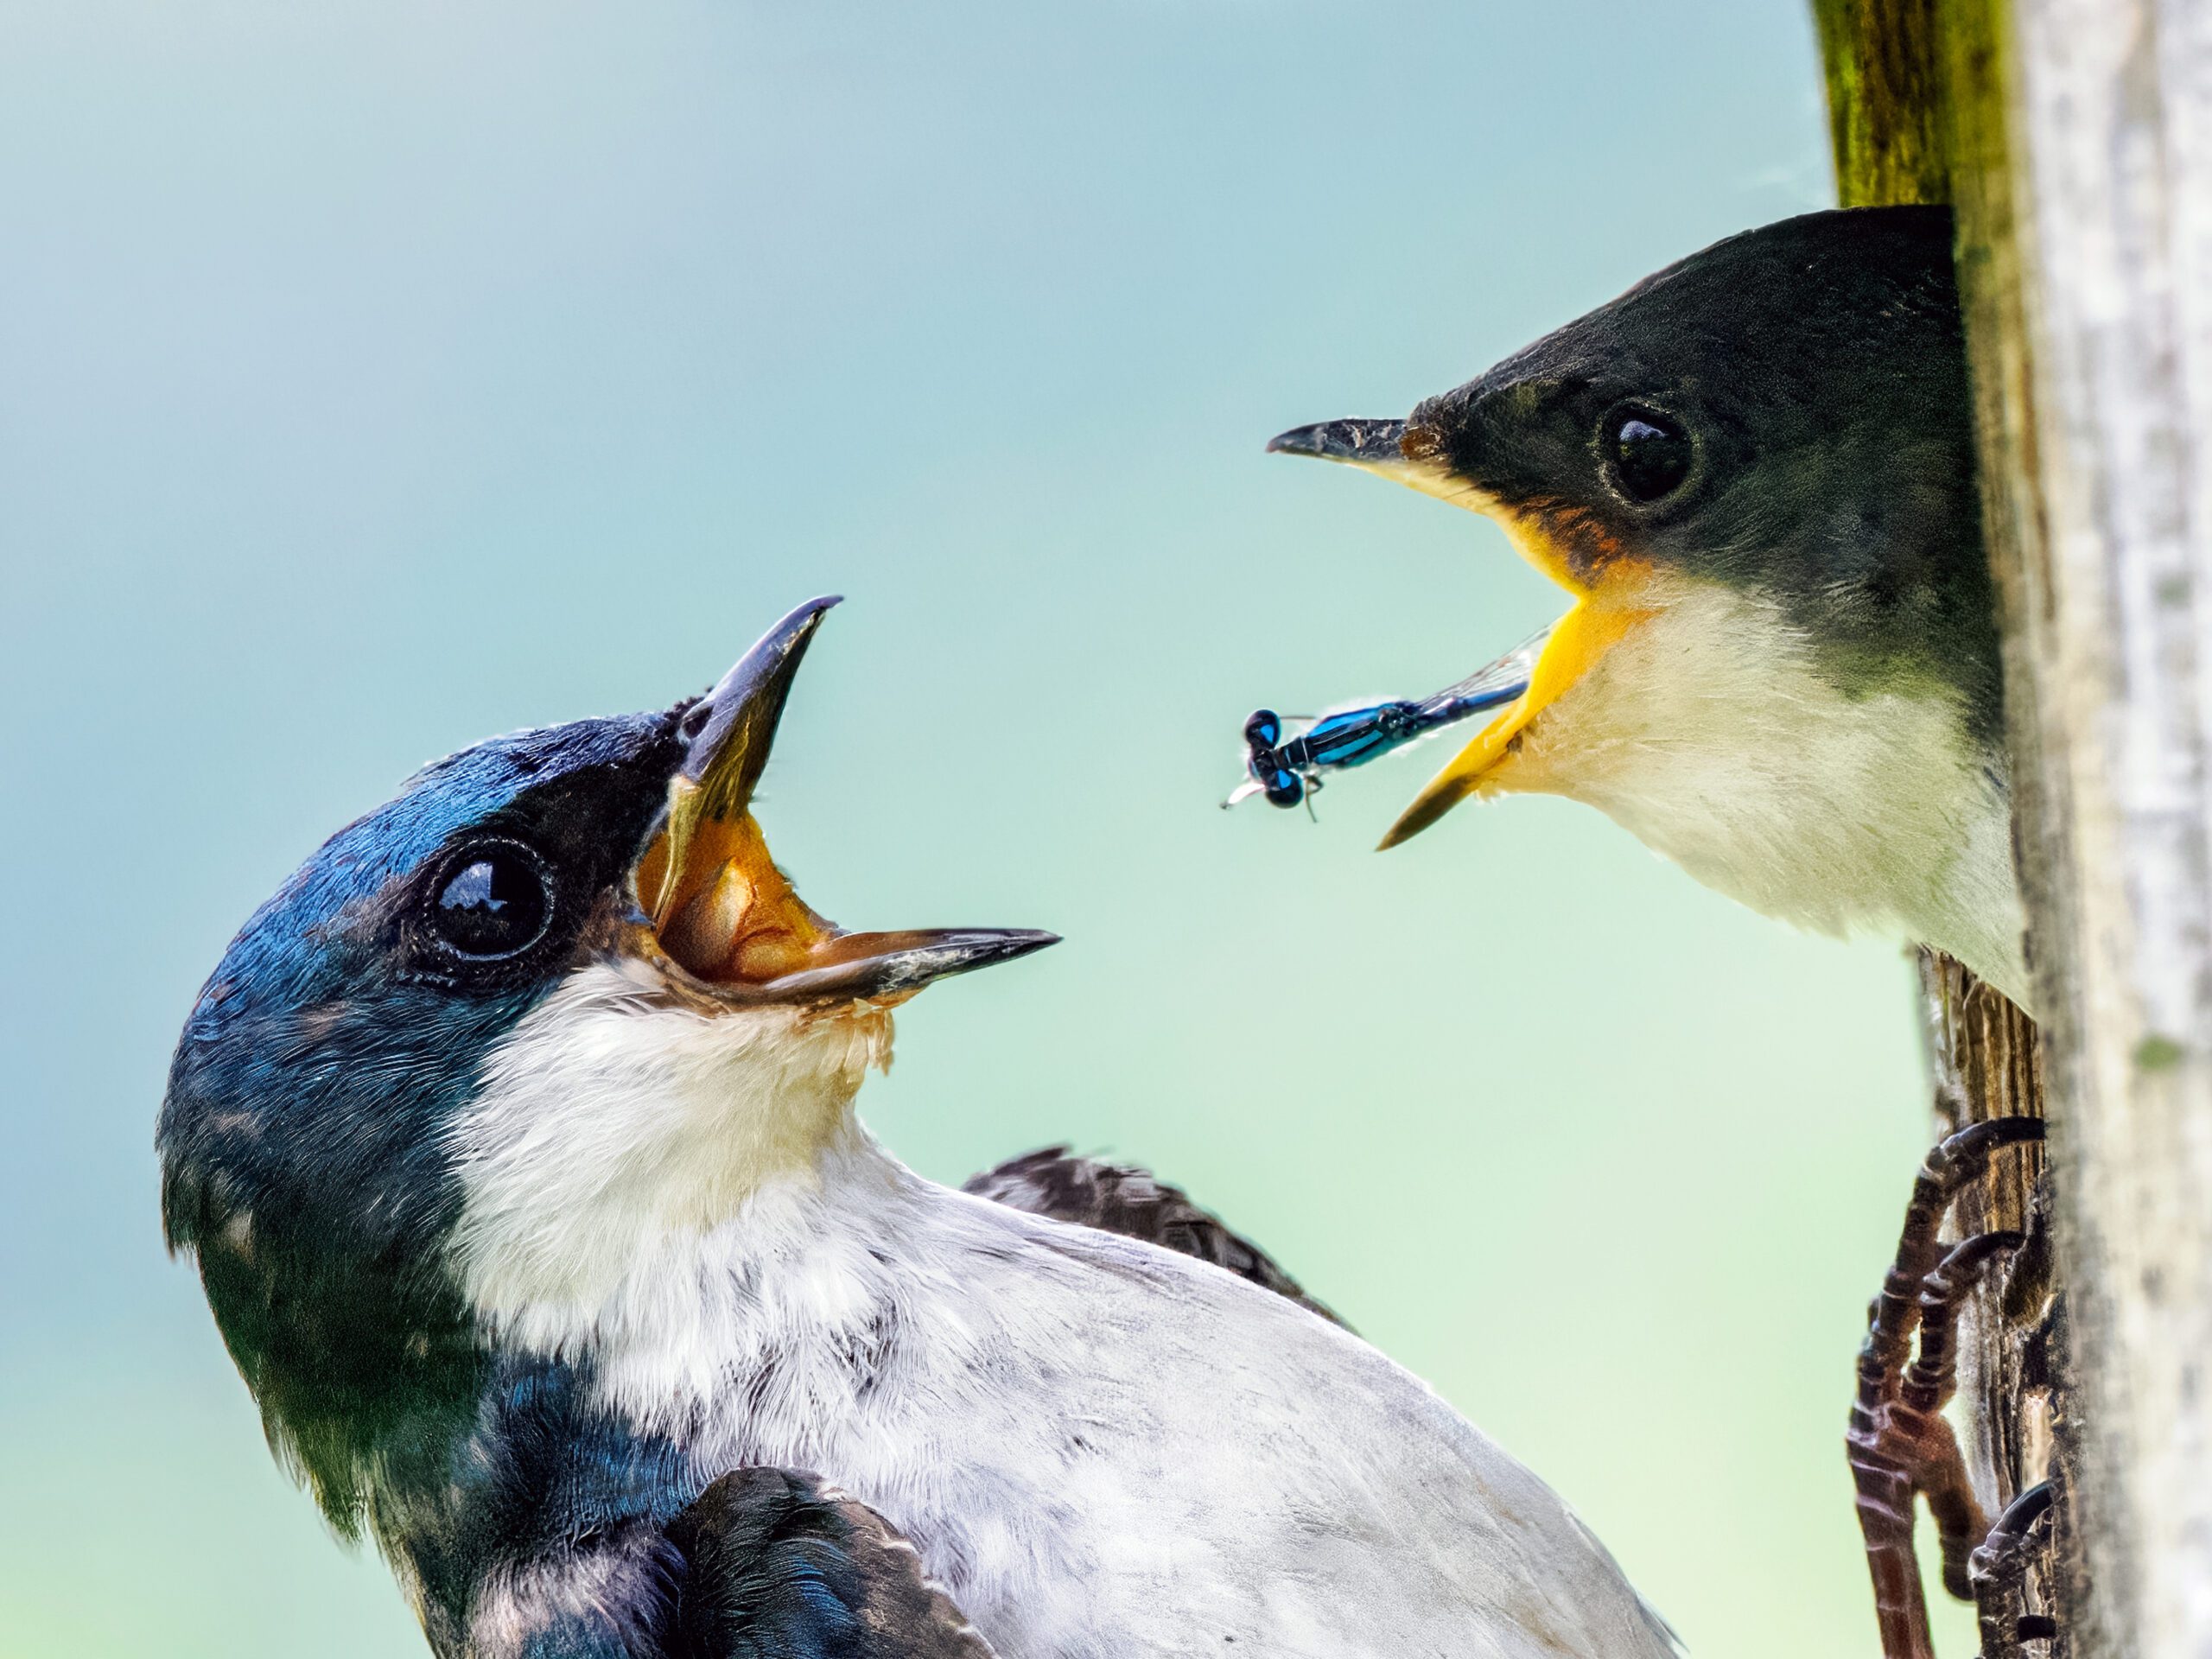 A close up of a food exchange at a nest cavity between two white and dark indigo birds,